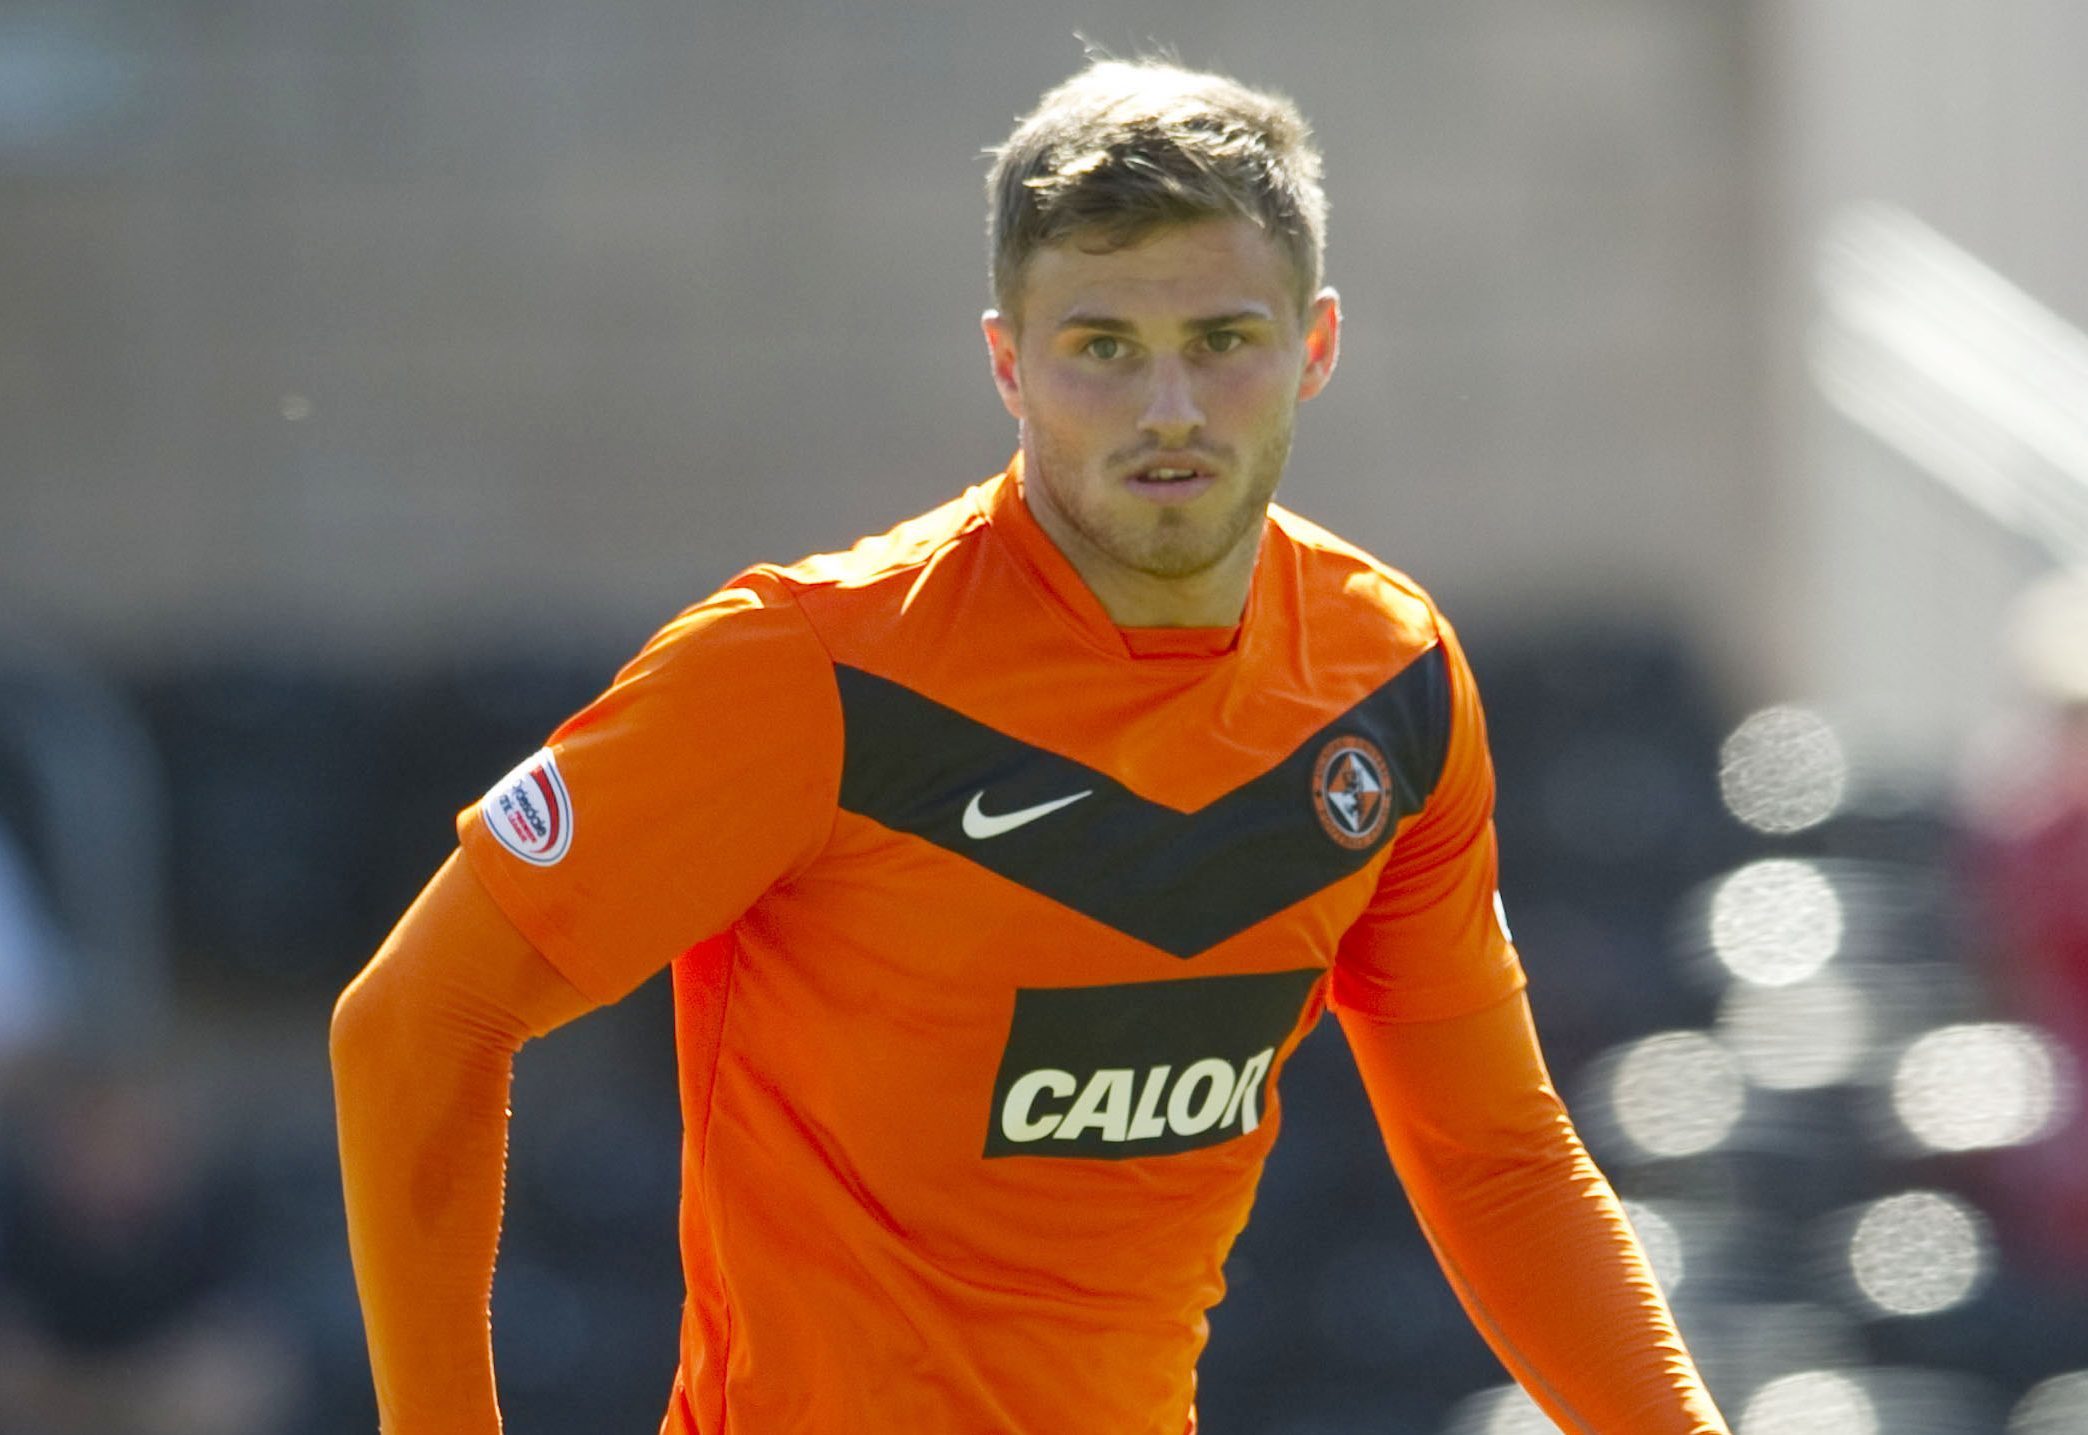 David Goodwillie says he is considering an appeal after the civil court verdict.